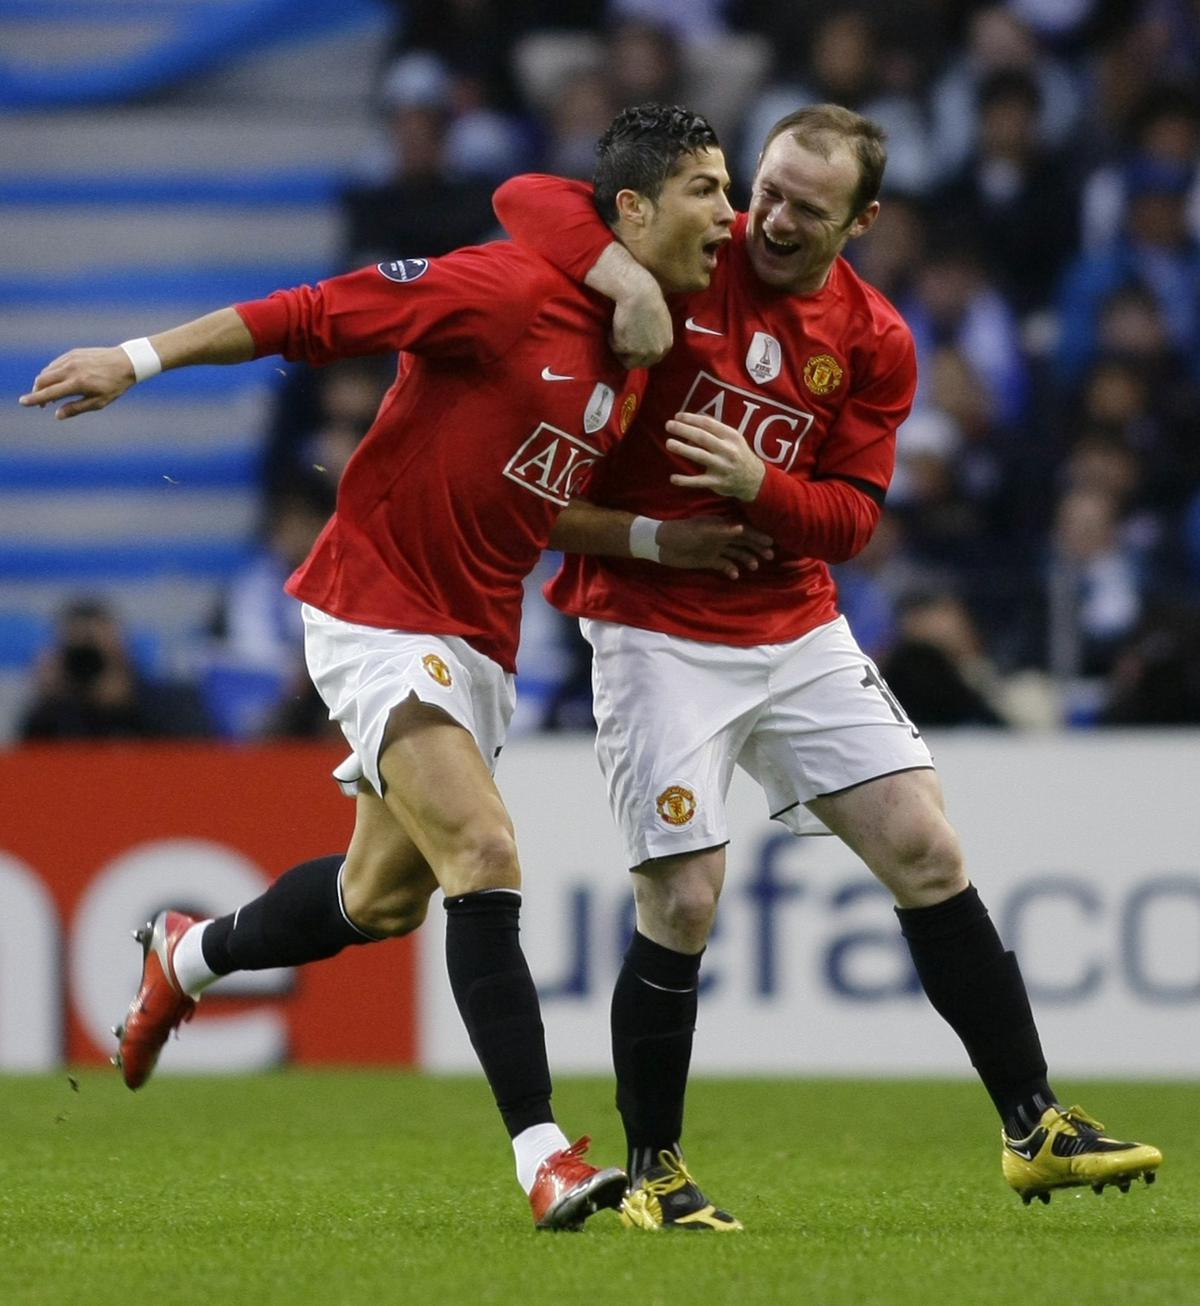 Rooney urges out-of-favour Ronaldo to stay patient at Man United